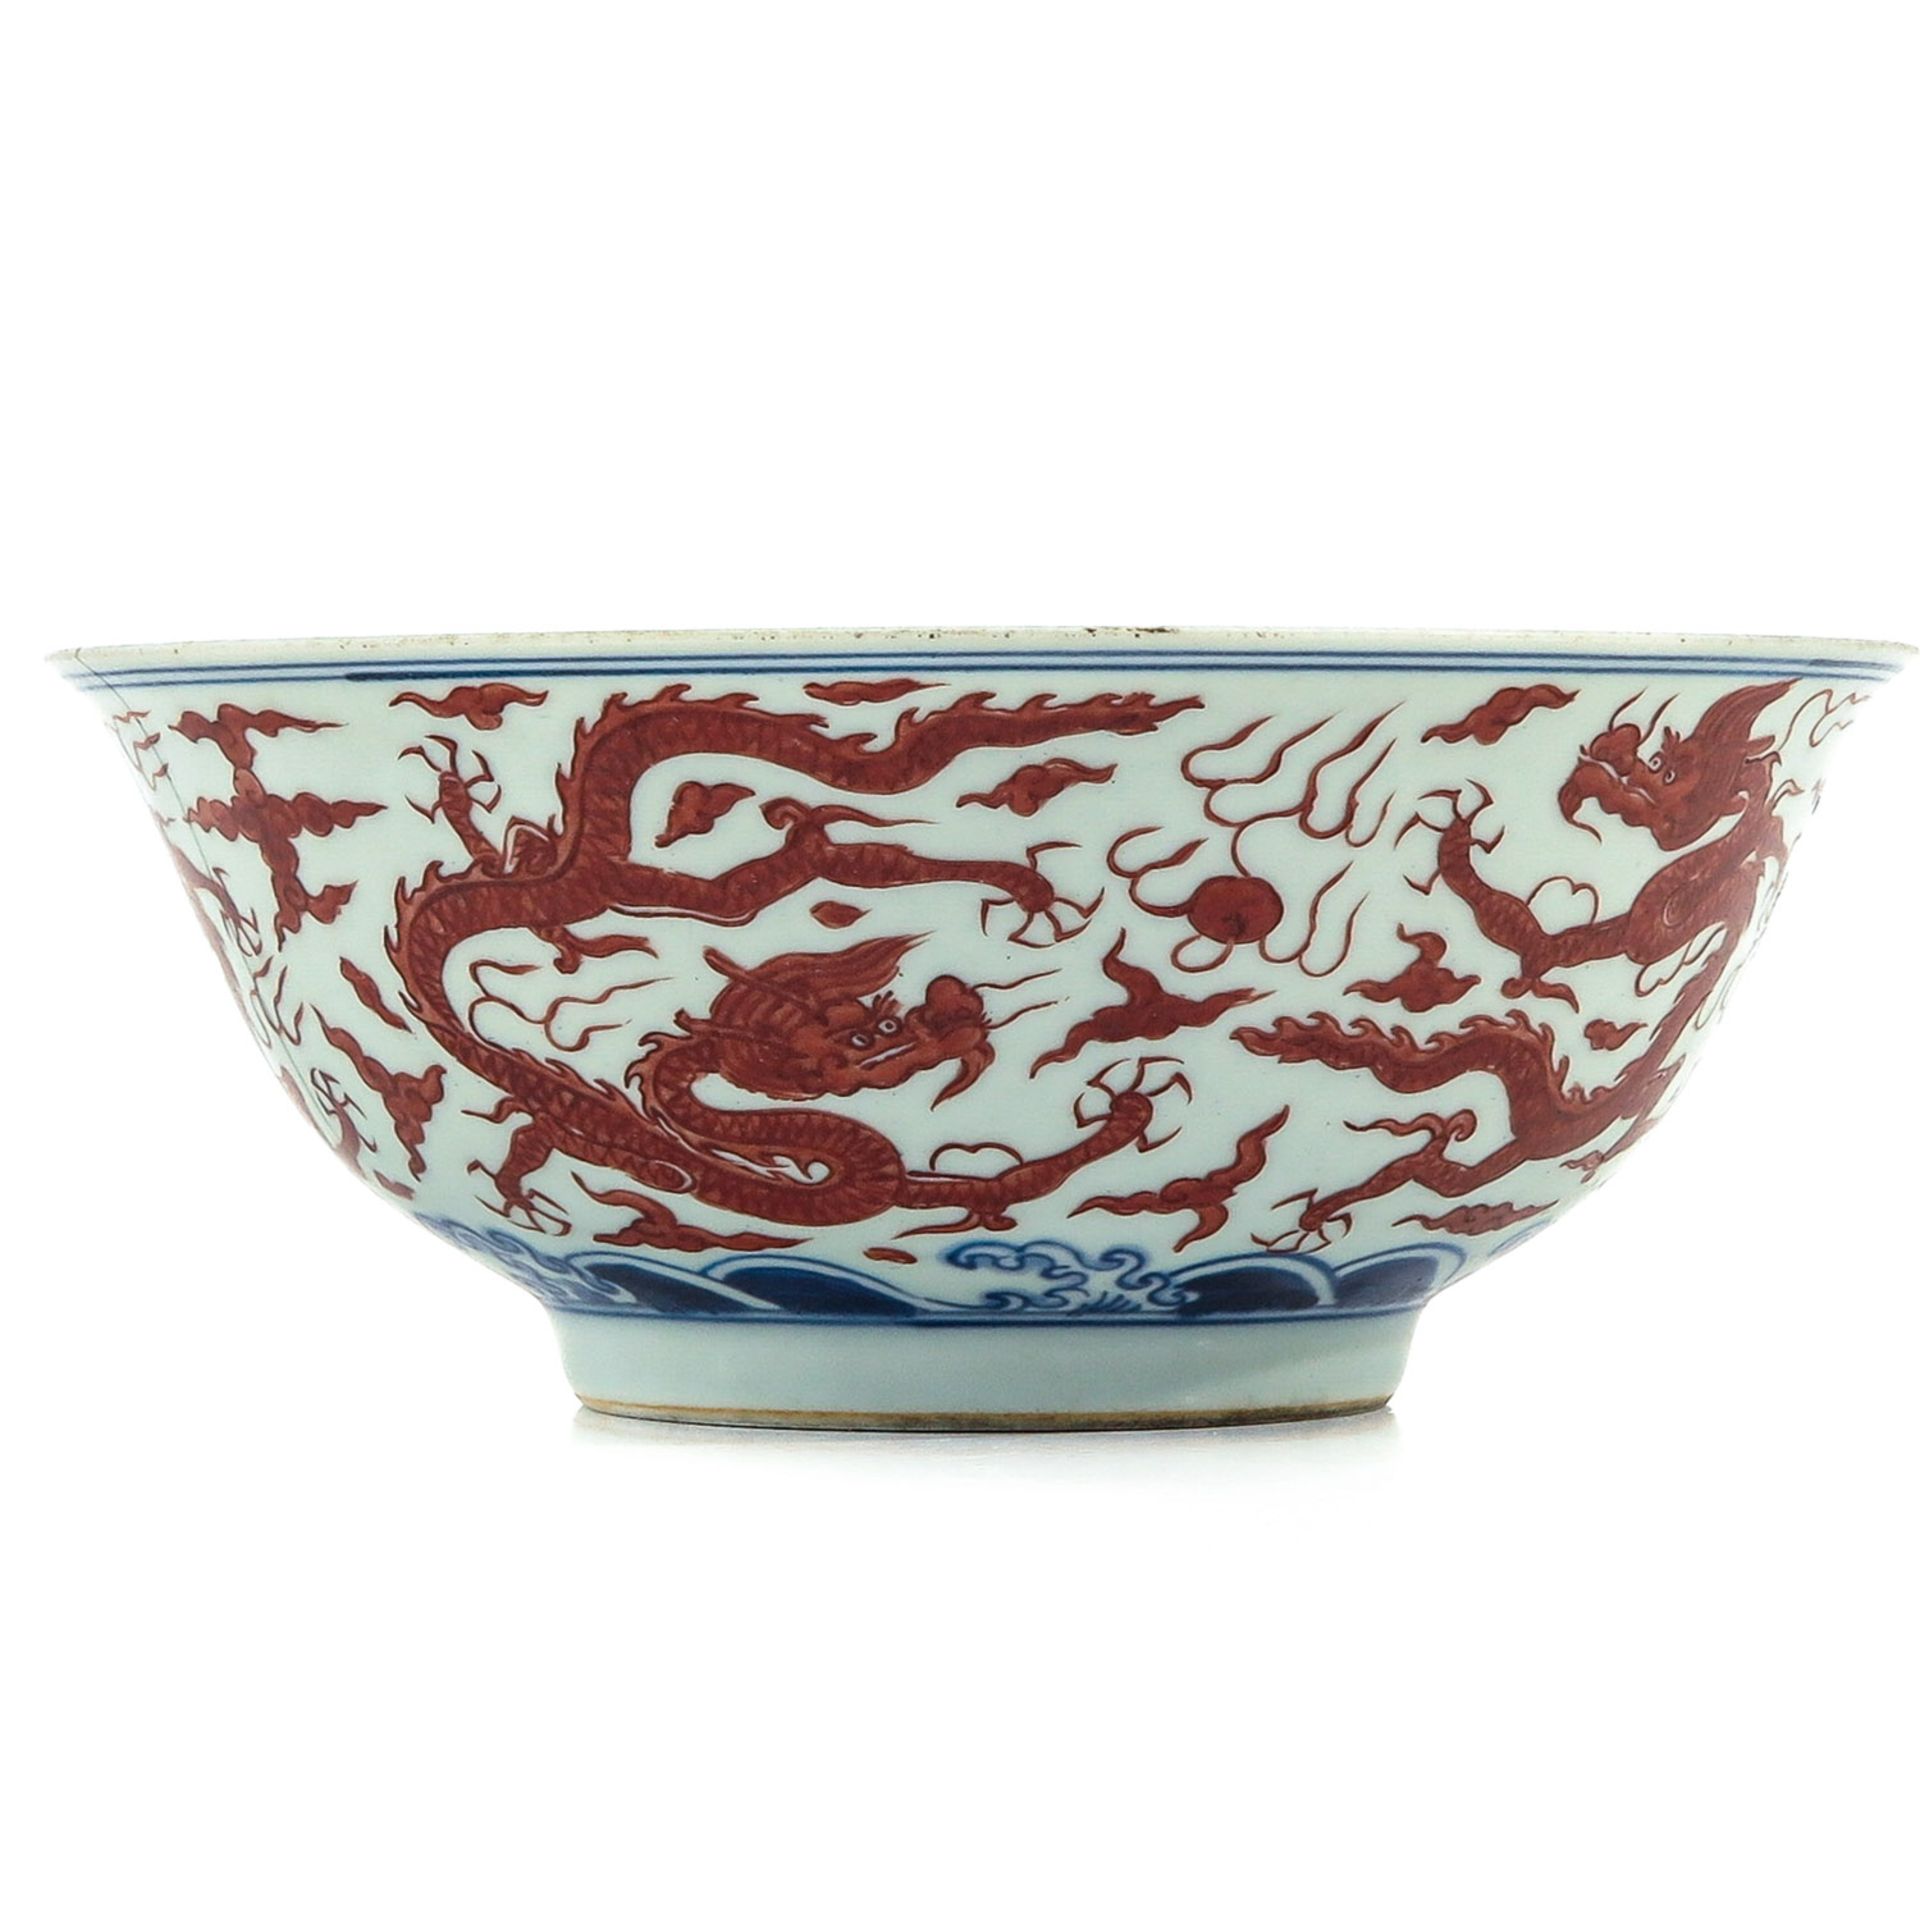 An Iron Blue and Red Decor Bowl - Image 3 of 10